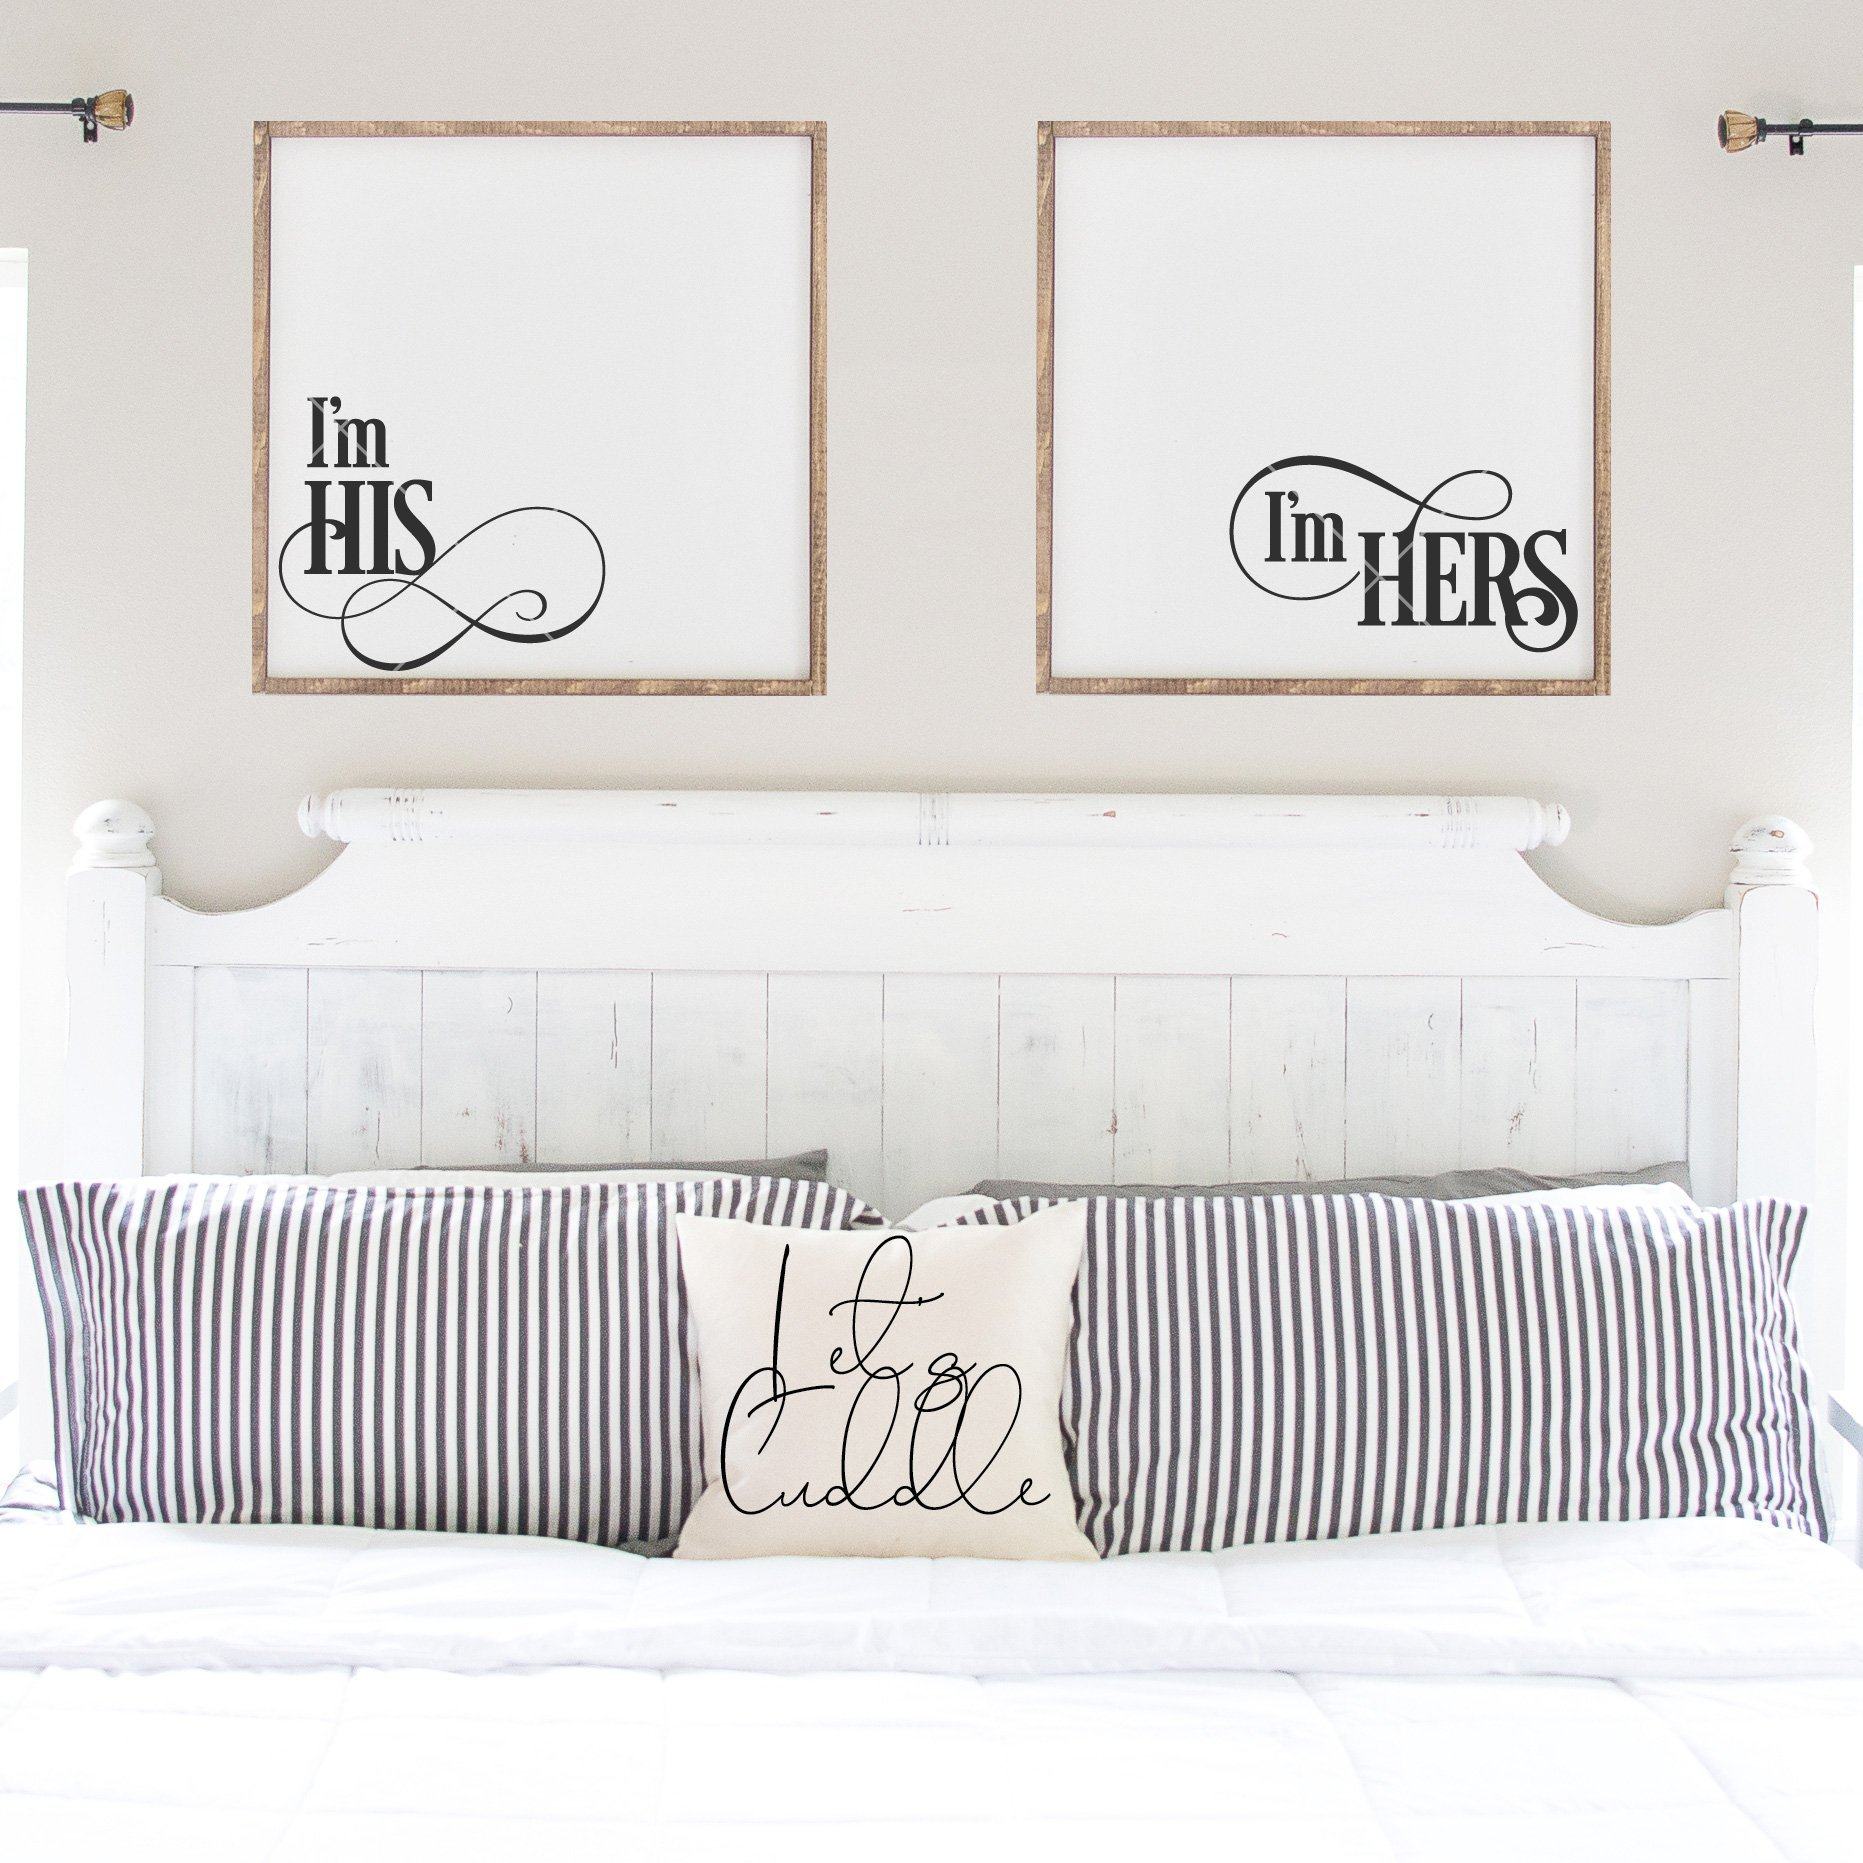 I'm His / I'm Hers / I'm Theirs Romantic Bedroom Sign SVG Set - Commercial Use SVG Files for Cricut & Silhouette